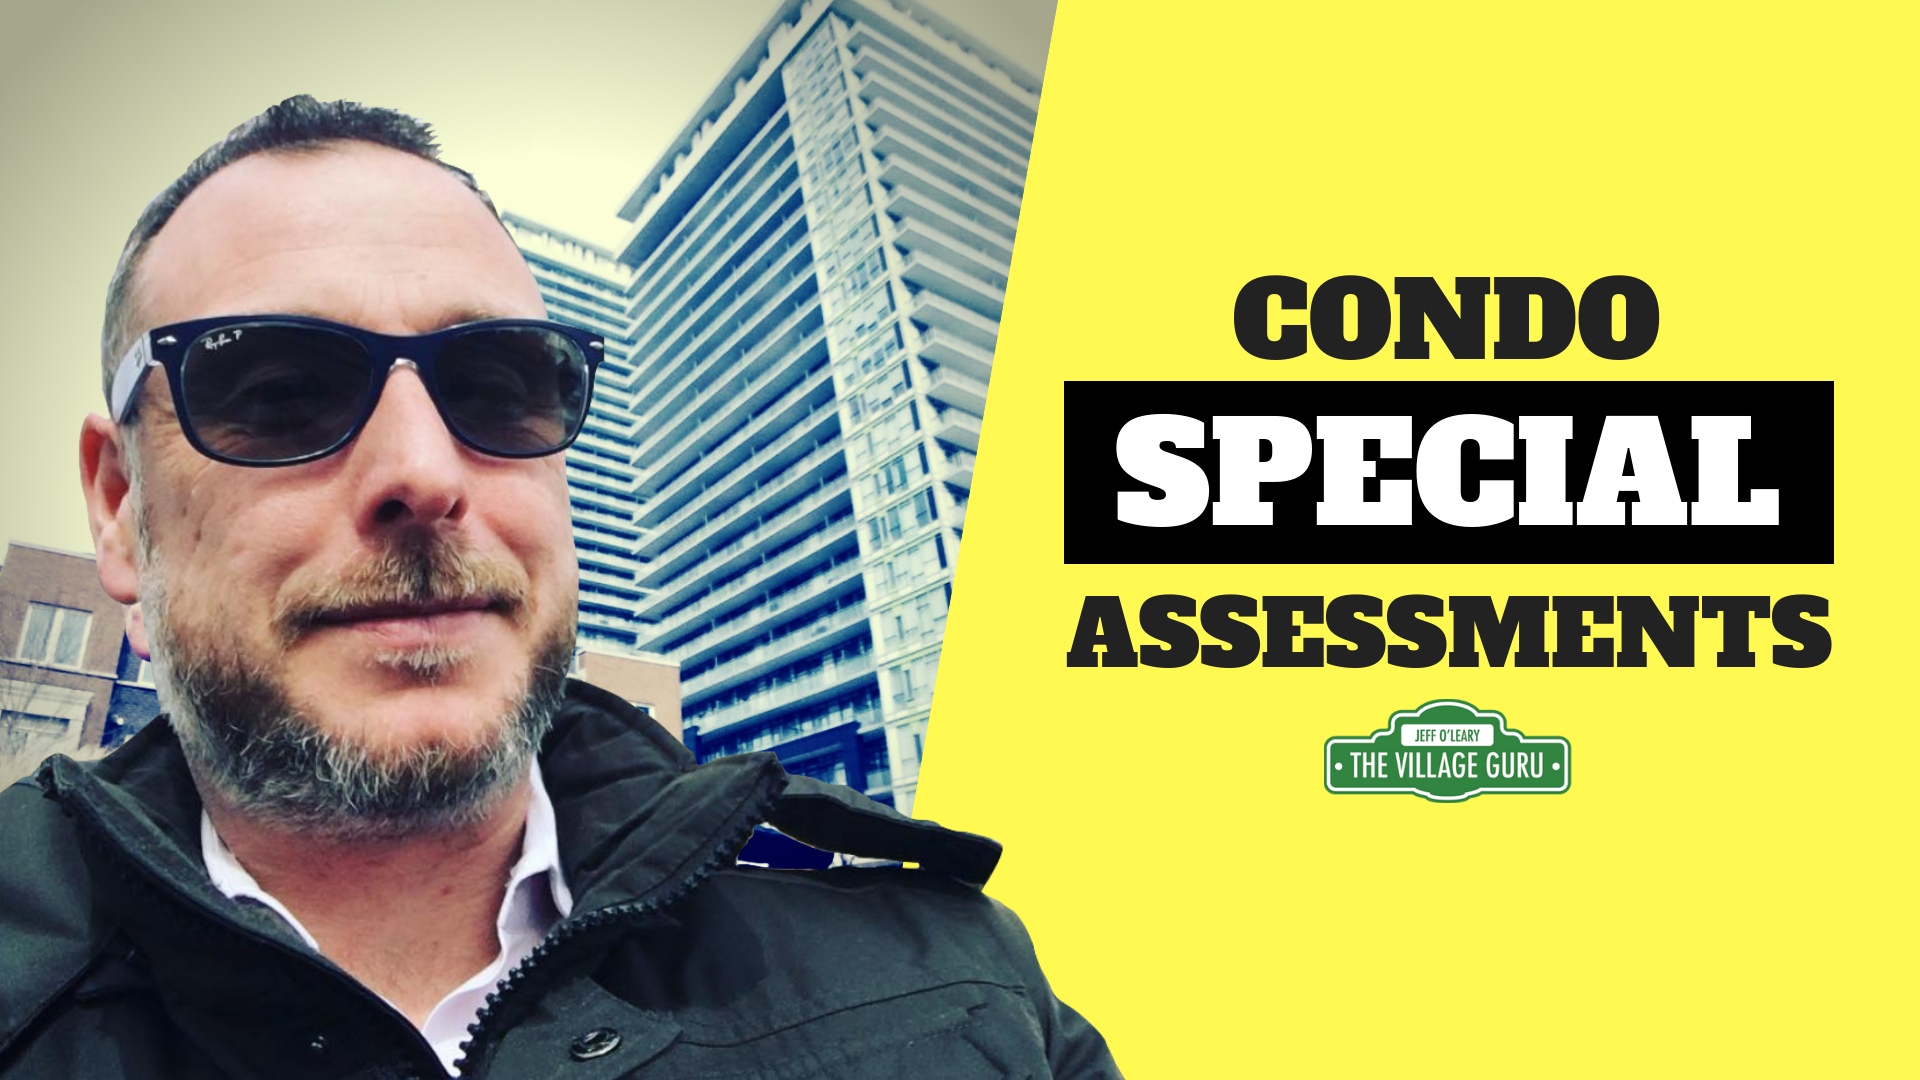 Special Assessment in a condo